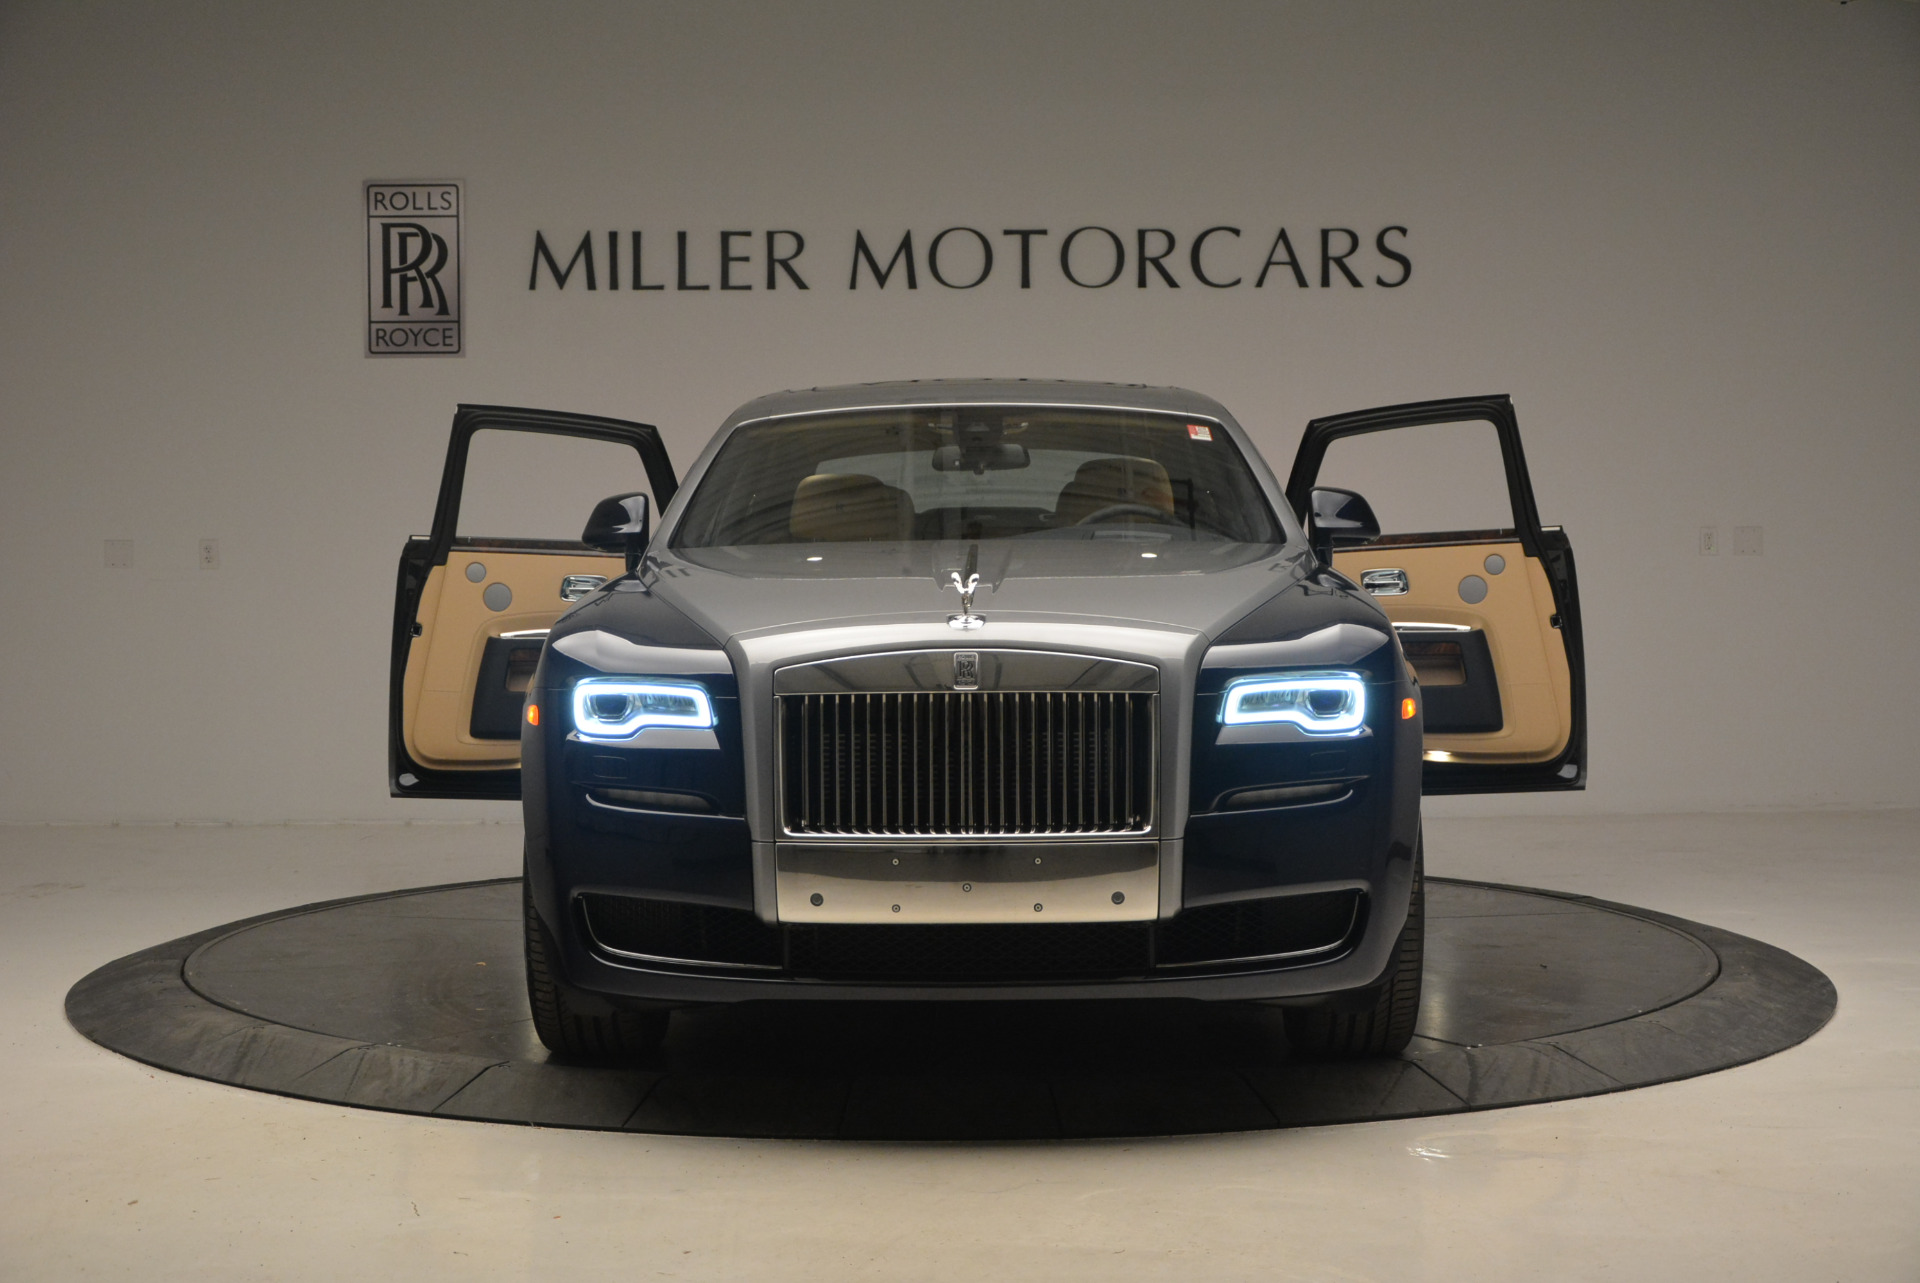 Newsflash: Schedoni and Rolls-Royce presents the most expensive